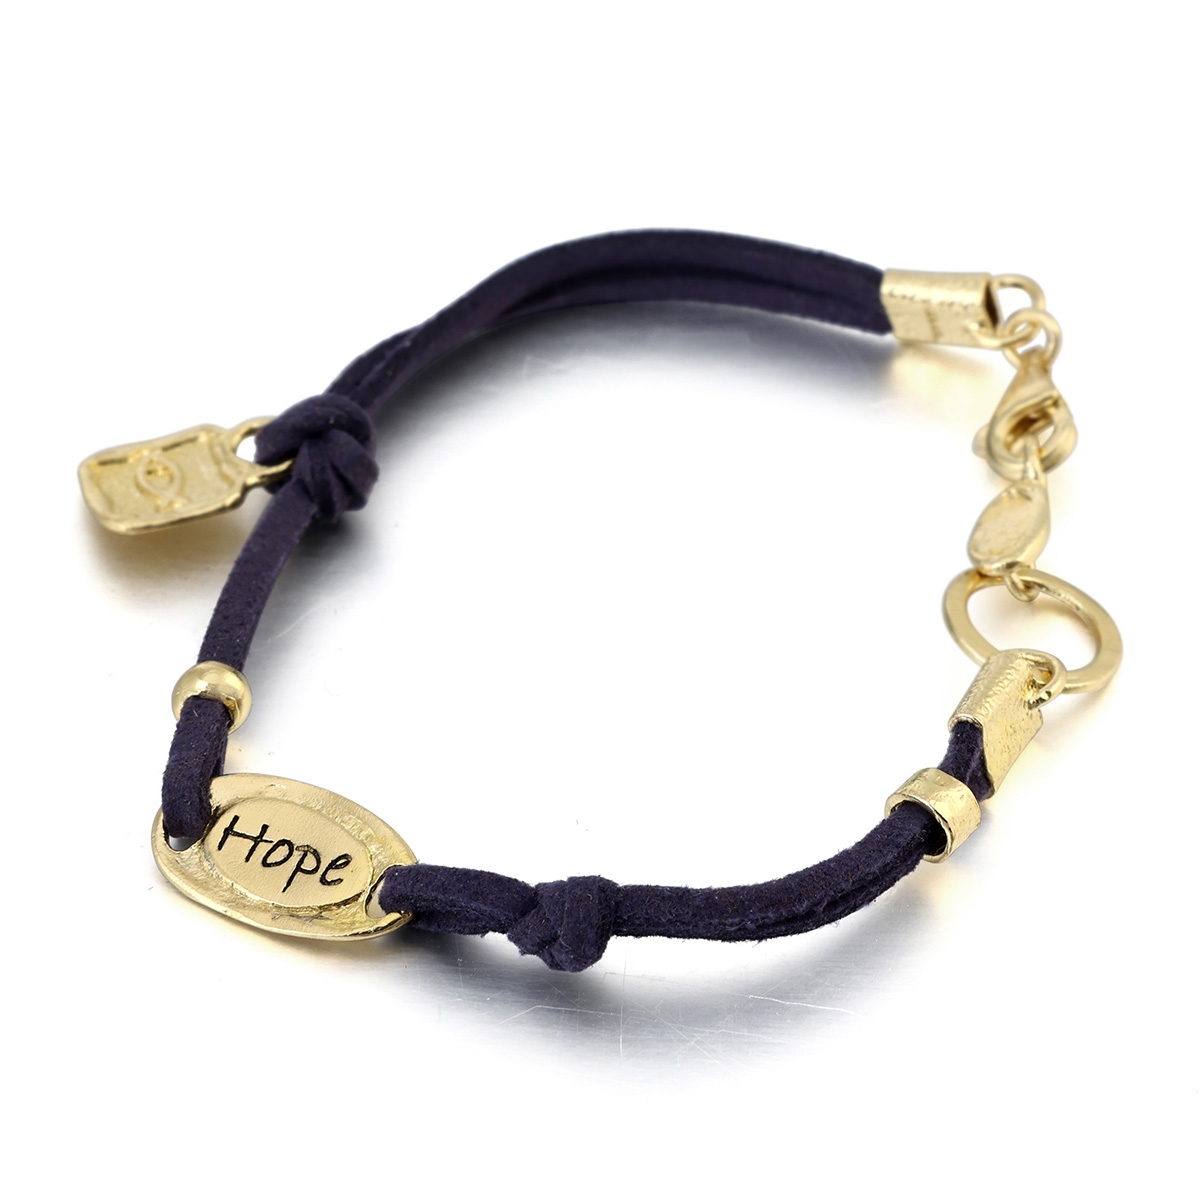 "Hope" Gold Plated Sterling Silver and Genuine Leather Bracelet - 1